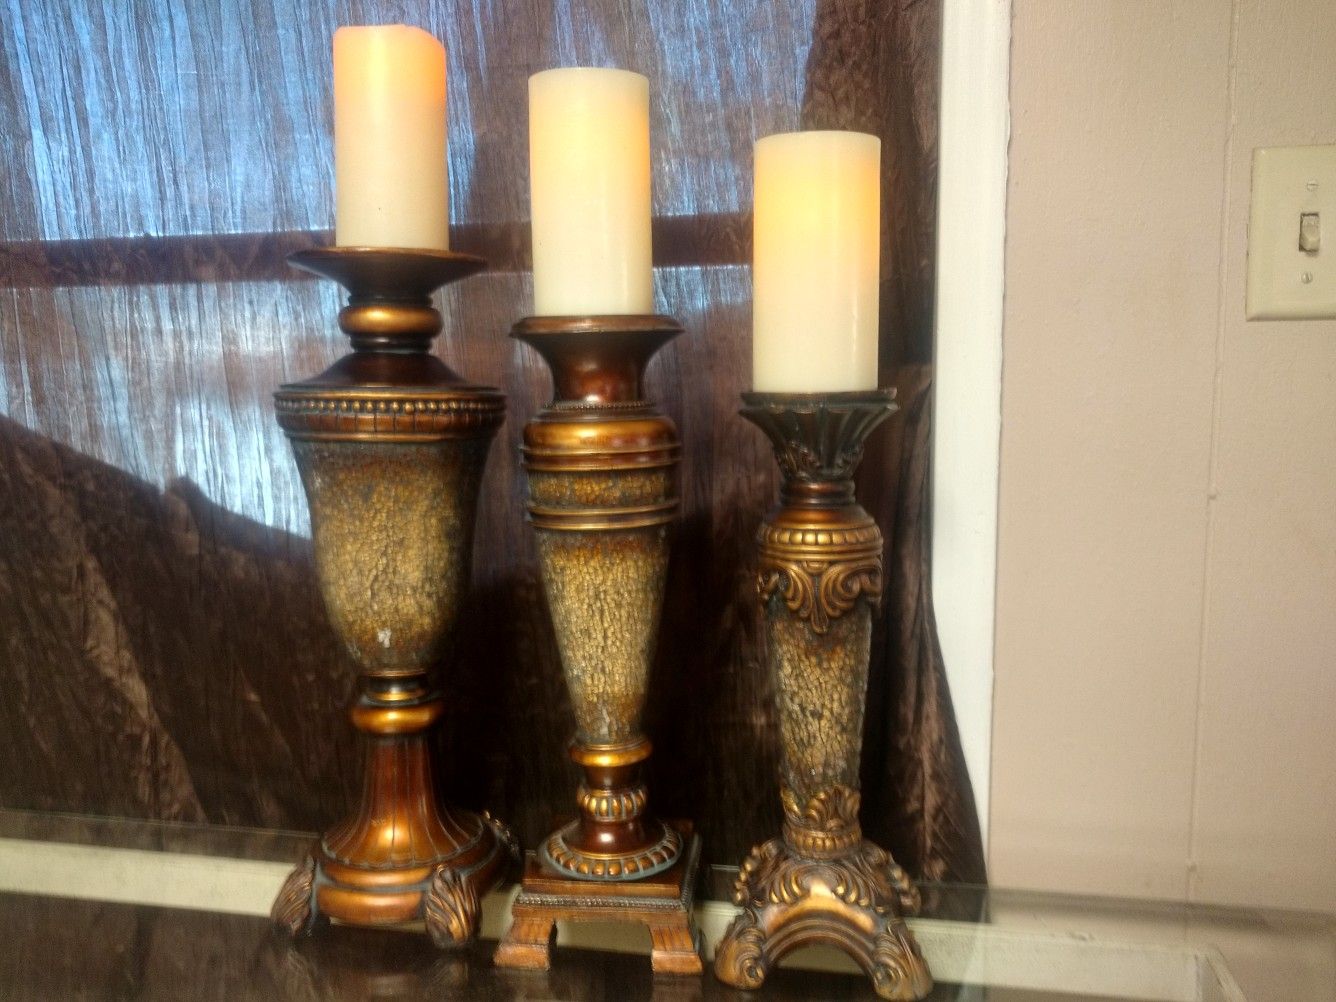 Fancy candle holders